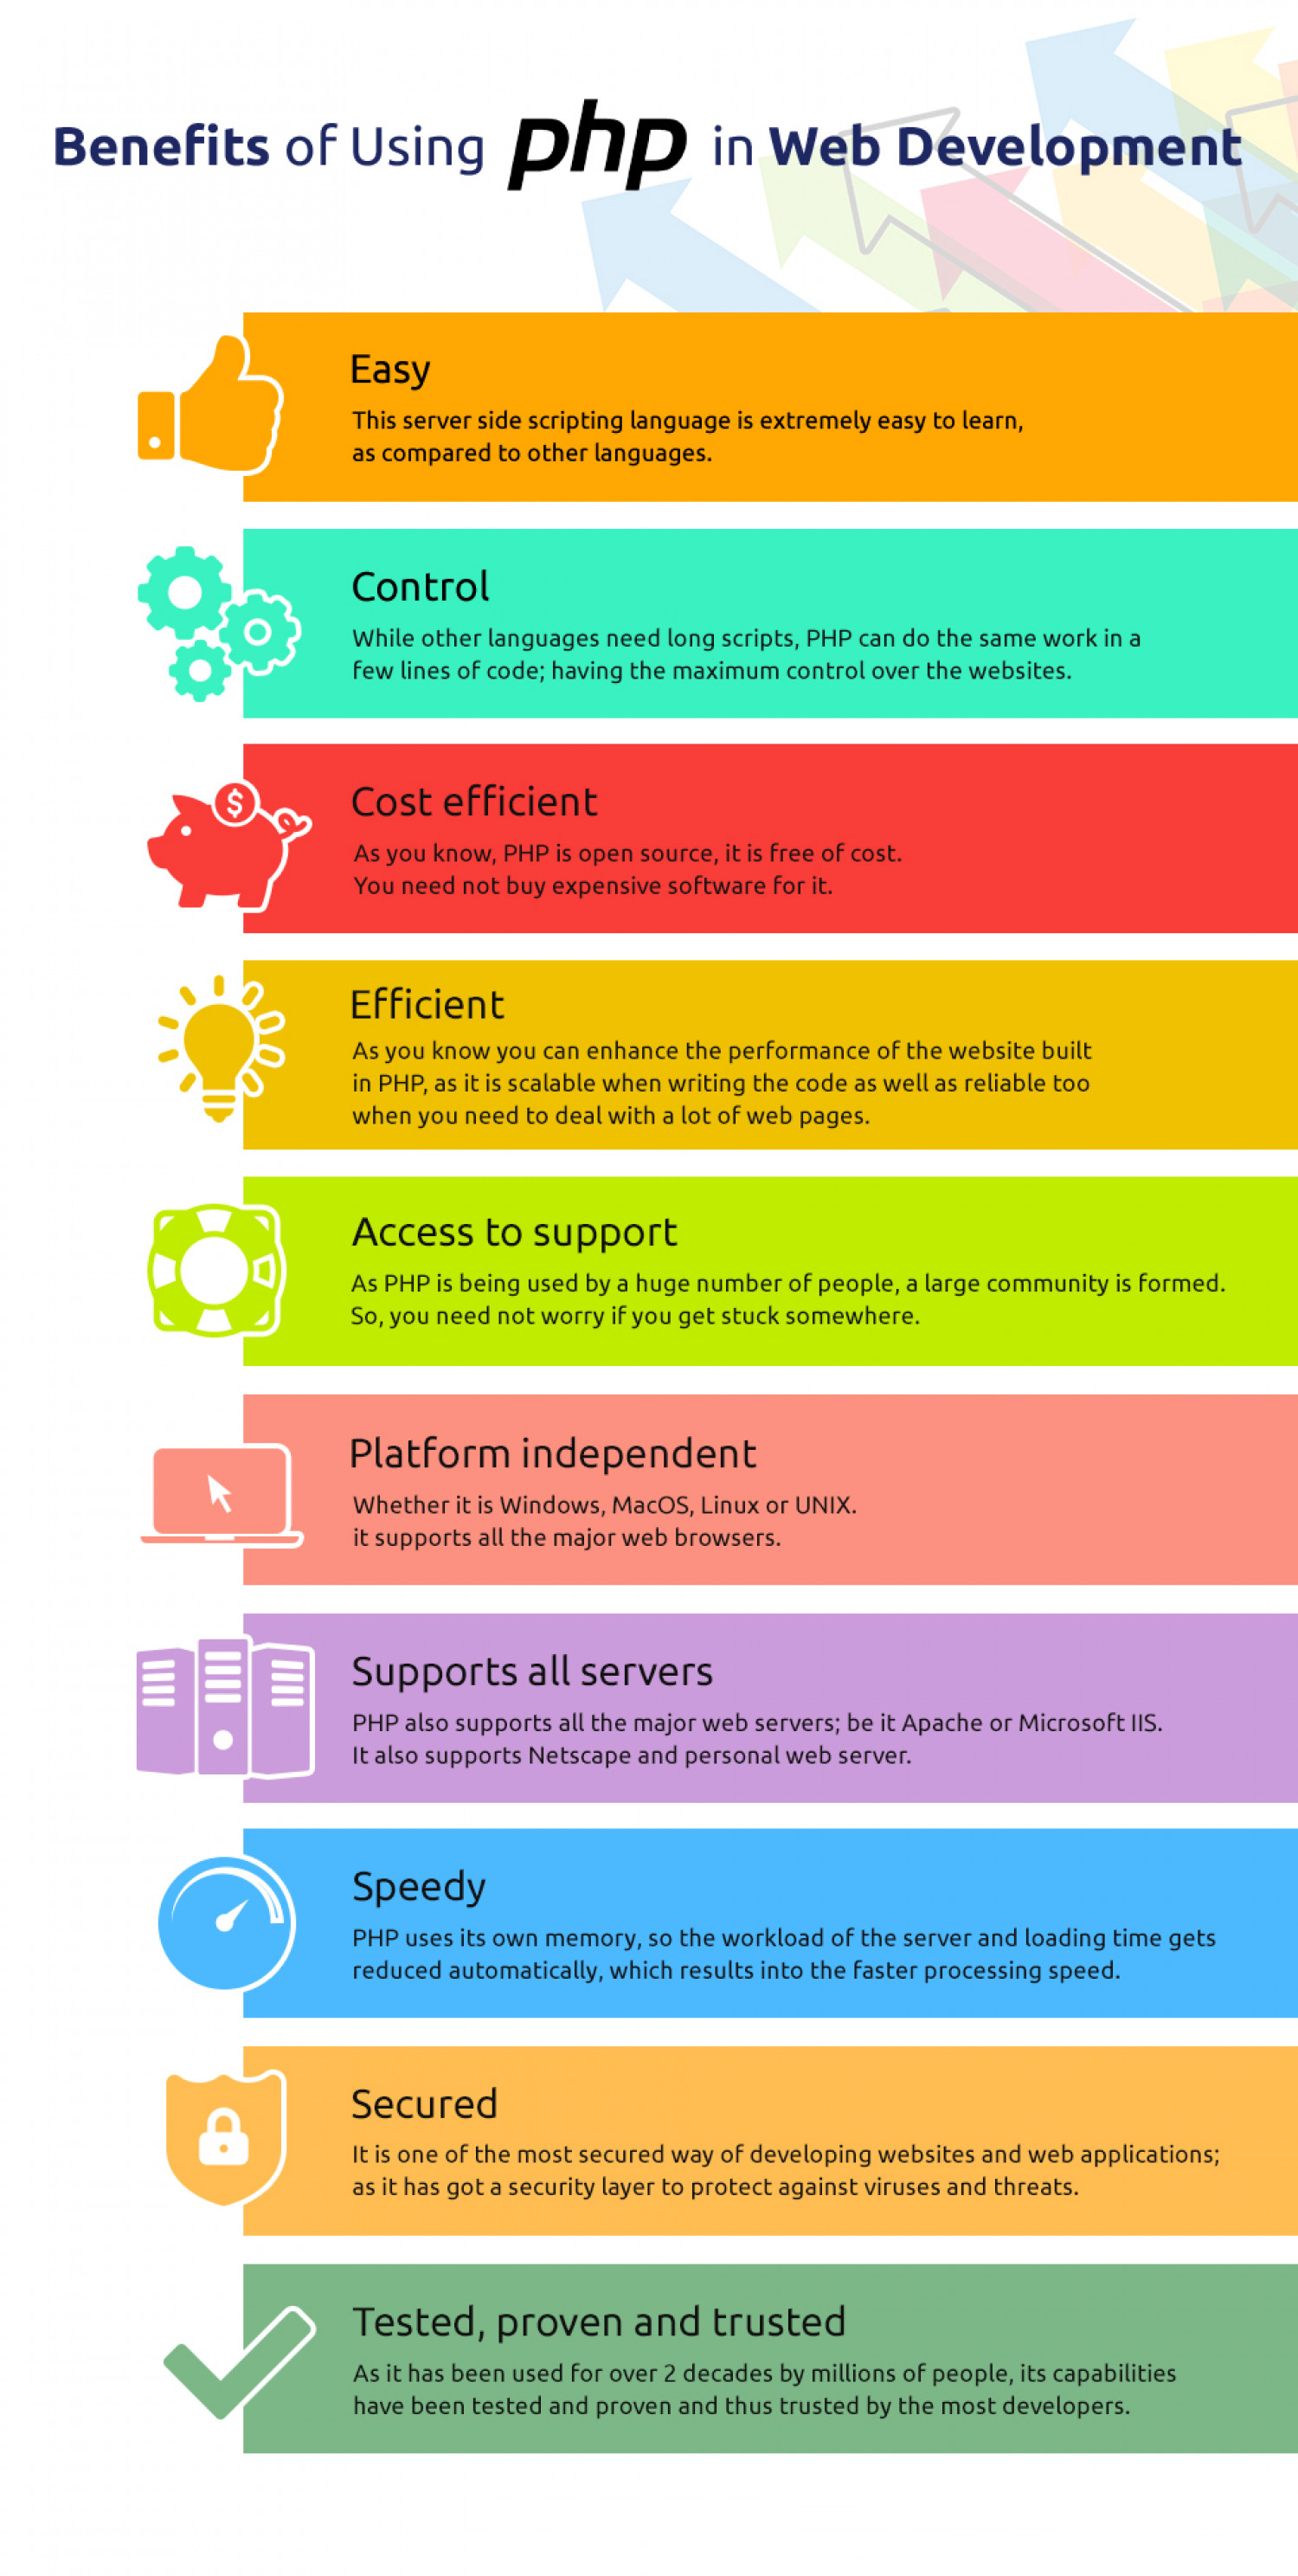 Benefits of php